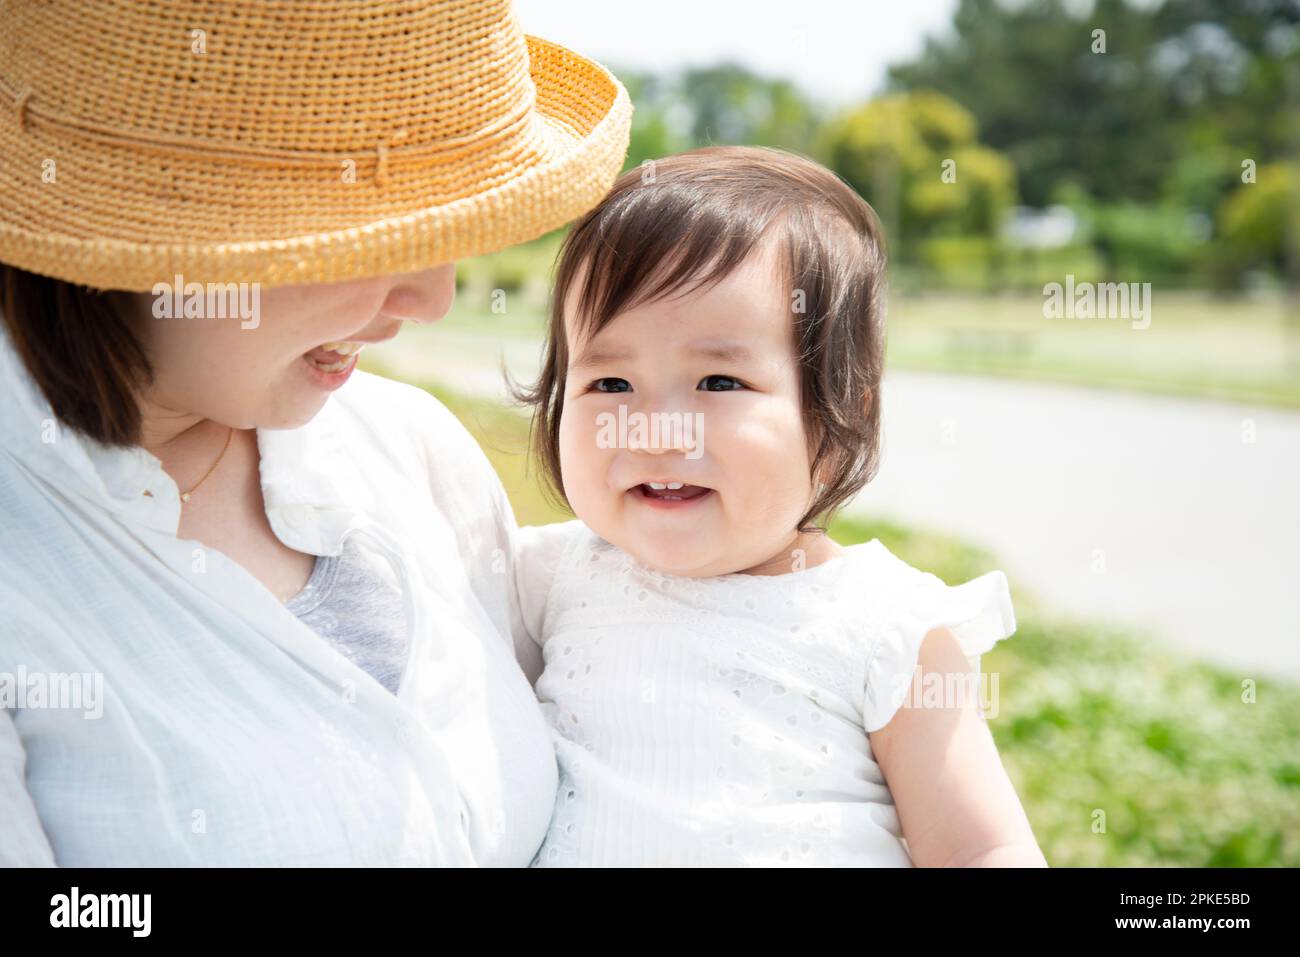 Laughing baby being carried by mother Stock Photo